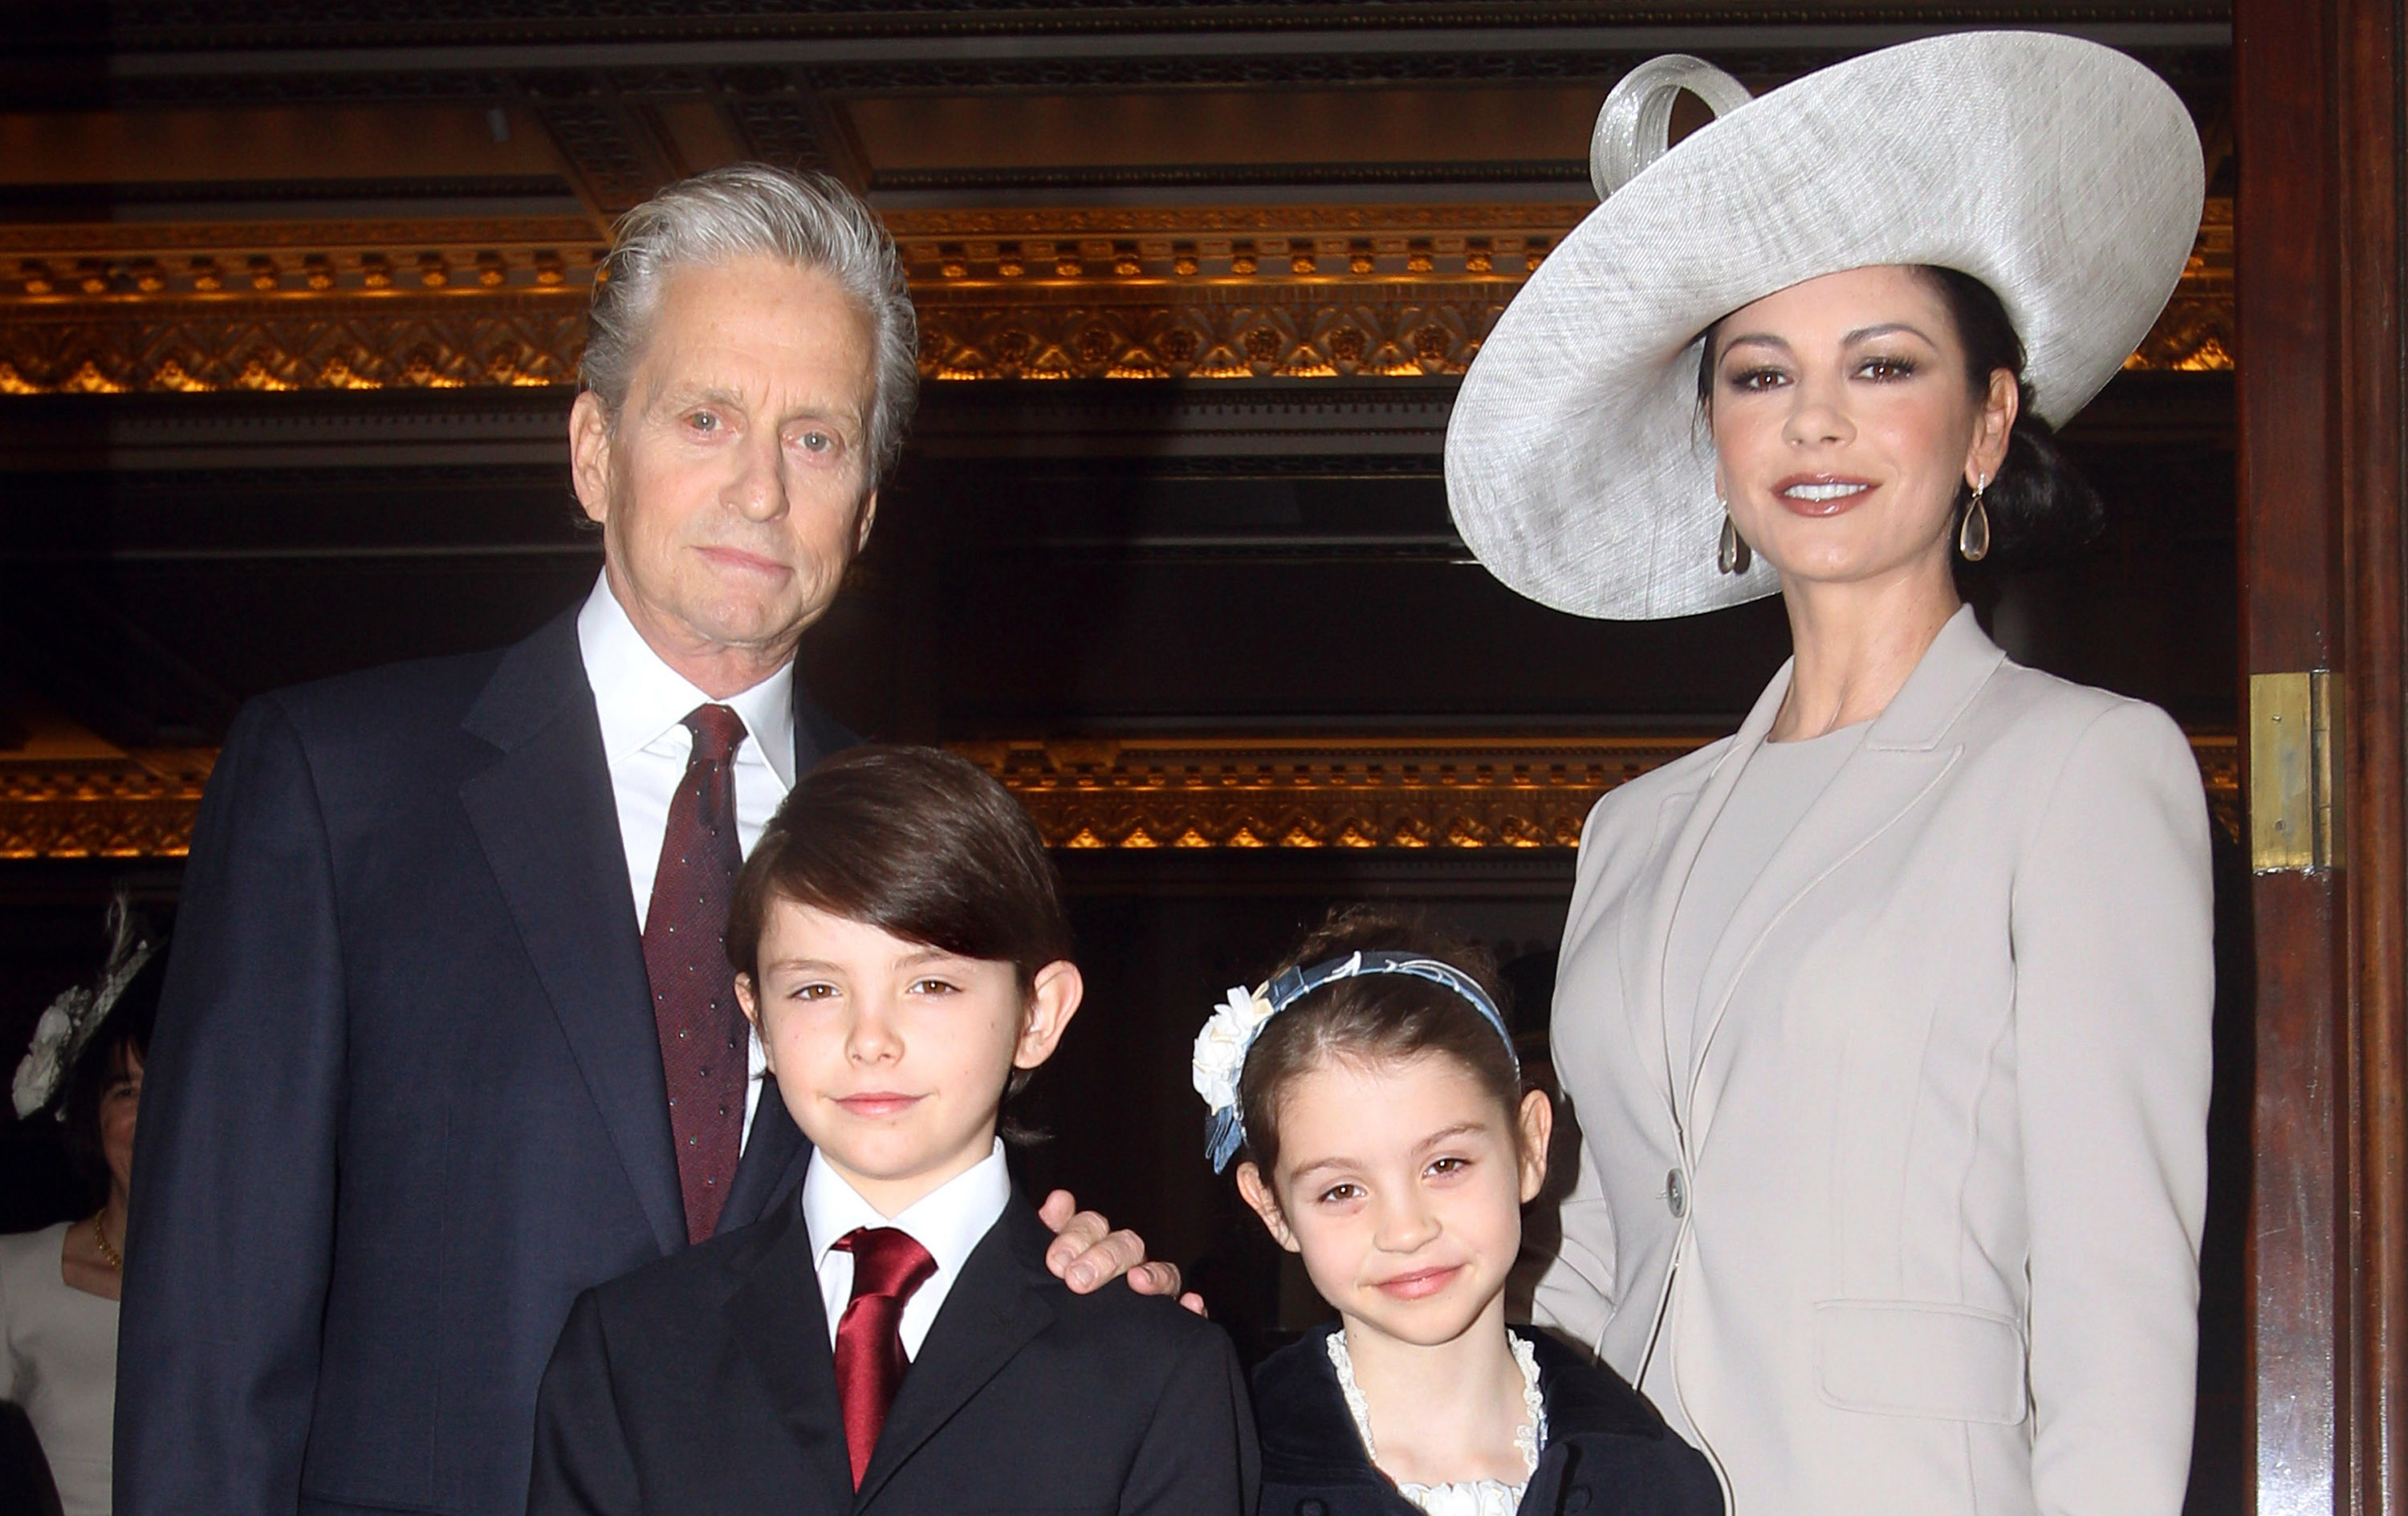 Catherine Zeta-Jones, Michael Douglas and their children Dylan and Carys at Buckingham Palace on February 24, 2011. | Source: Getty Images